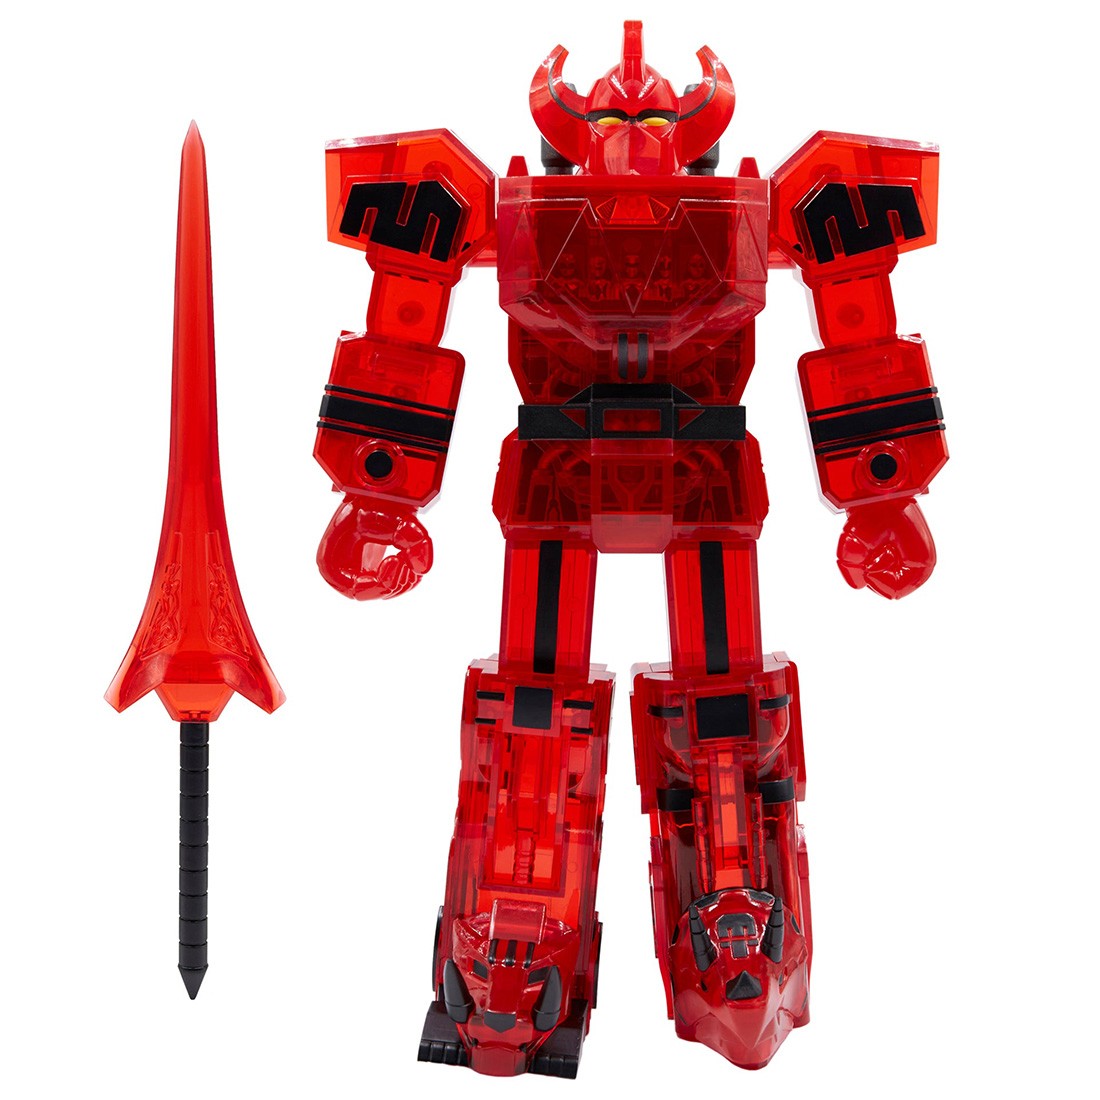 Super7 Mighty Morphin Power Rangers Super Cyborg Megazord Red Clear Figure (red)